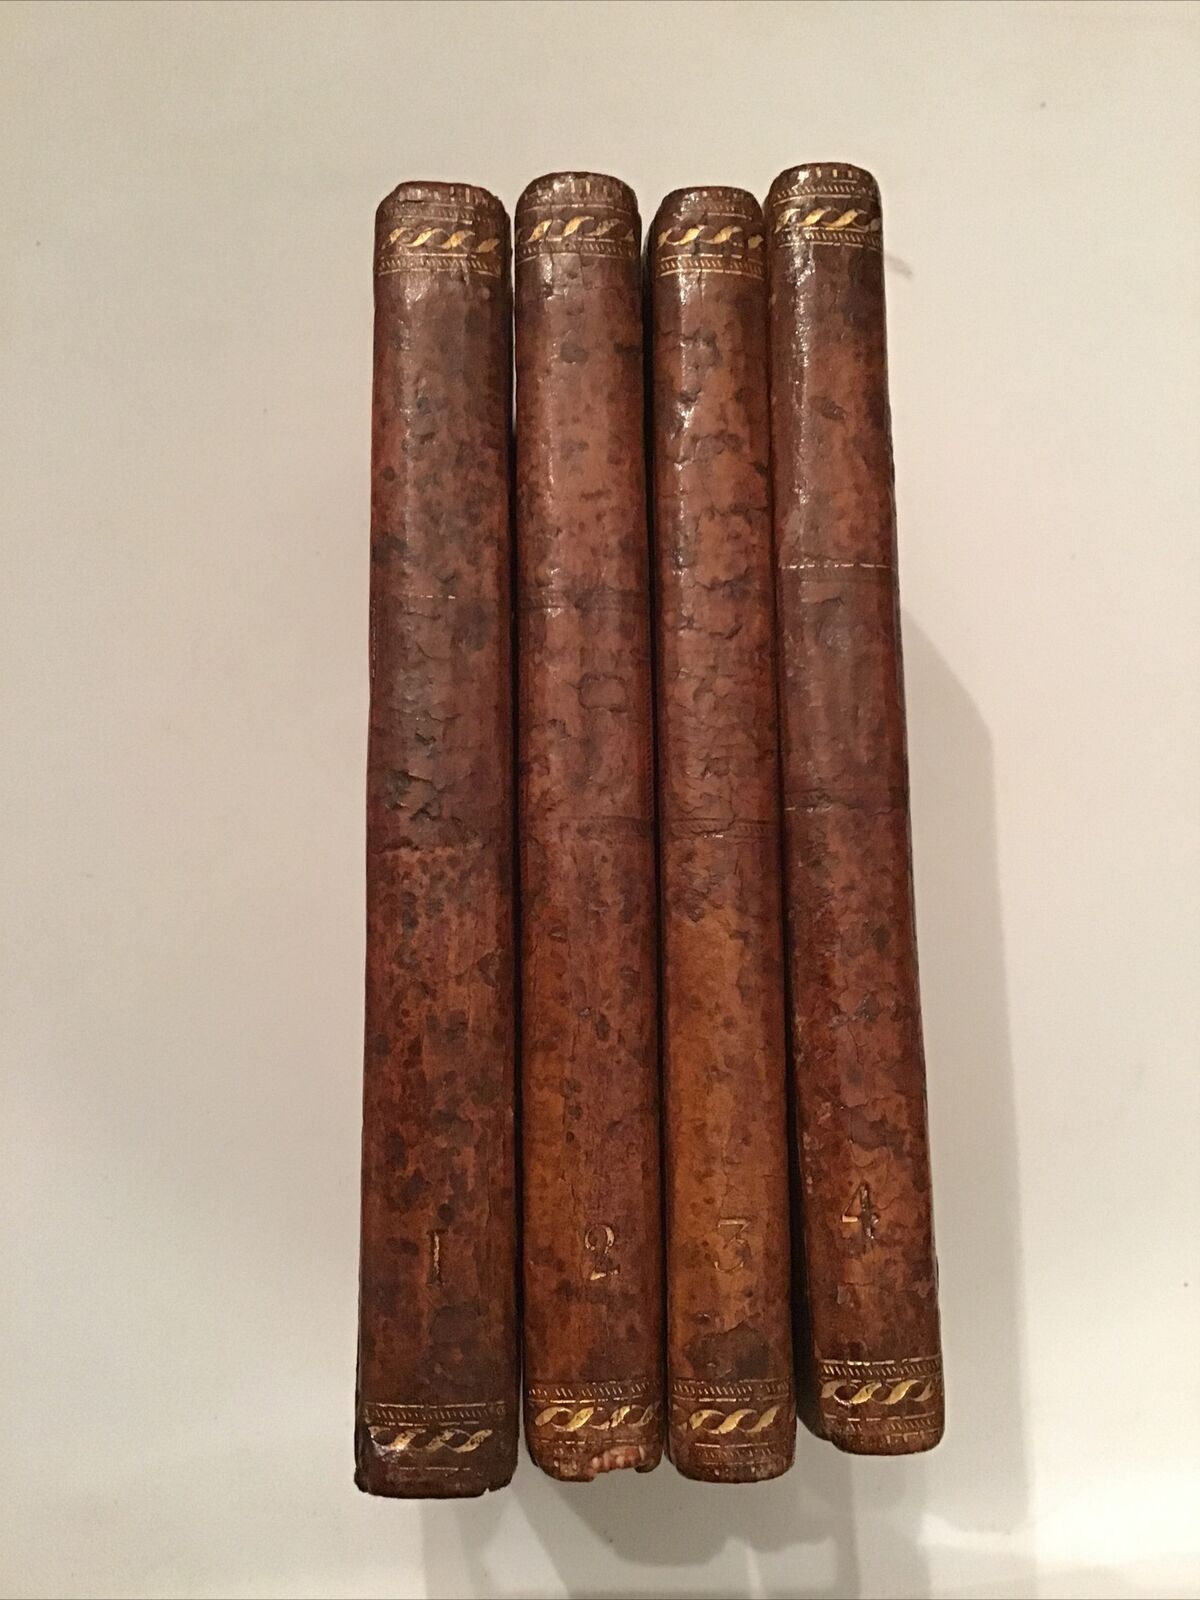 1793 The Connoisseur / by Mr. Town, Critic and Censor-General 4  Volumes Leather